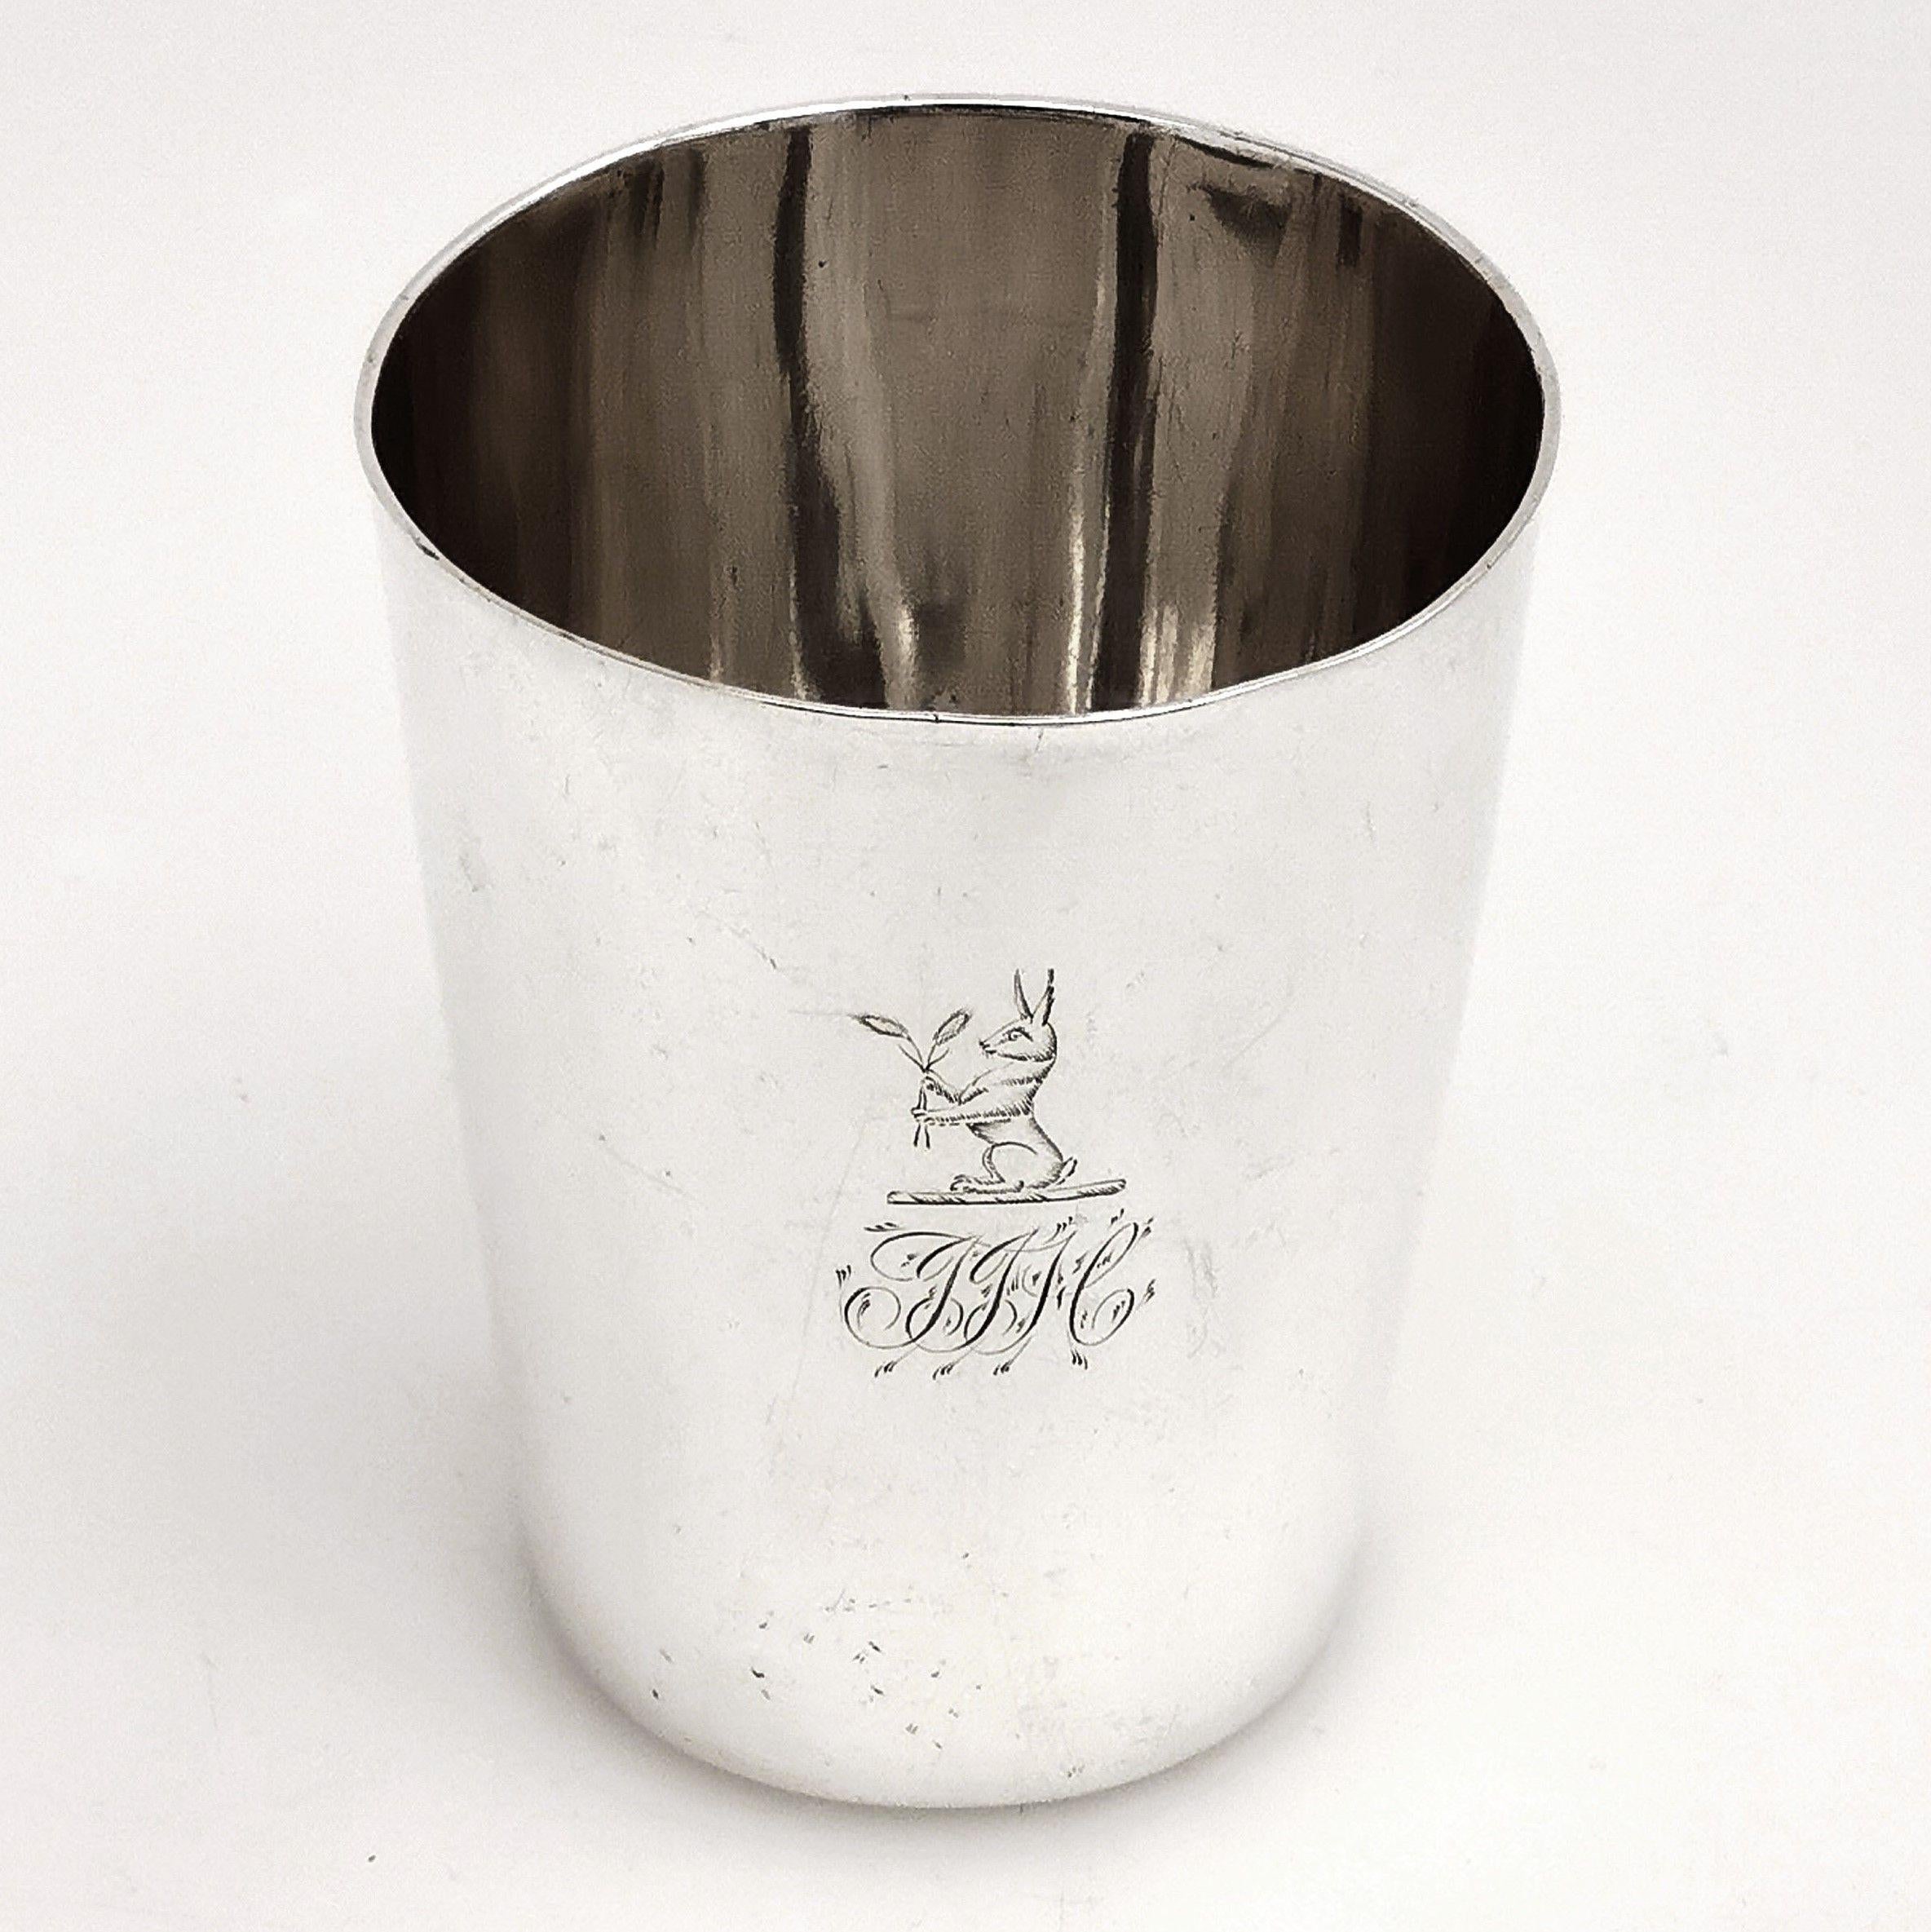 A gorgeous antique George III Irish Silver Beaker in a classic straight sided shape. The Goblet is un-embellished except for a delicate engraved rabbit crest with a monogram below. The Beaker is plain Polished Silver with an gorgeous patina